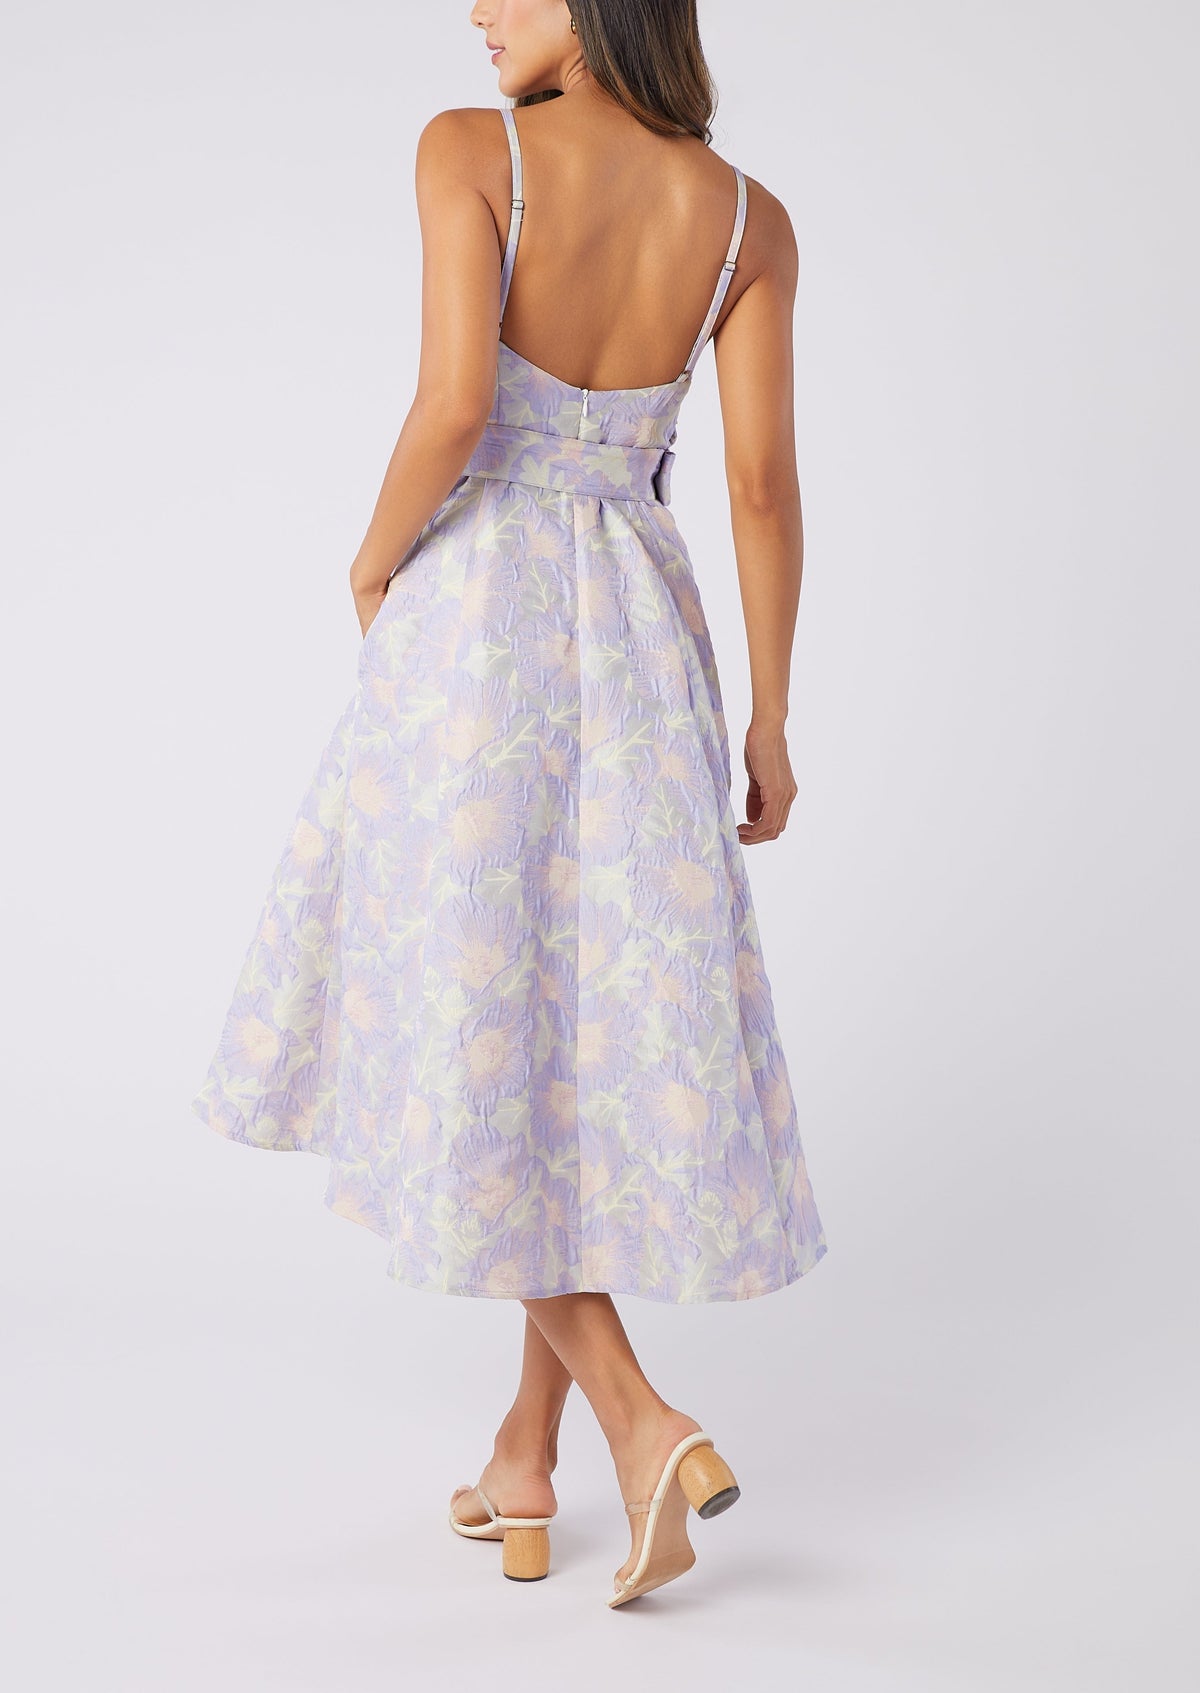 Annabelle Dress in Lilac Floral Jacquard